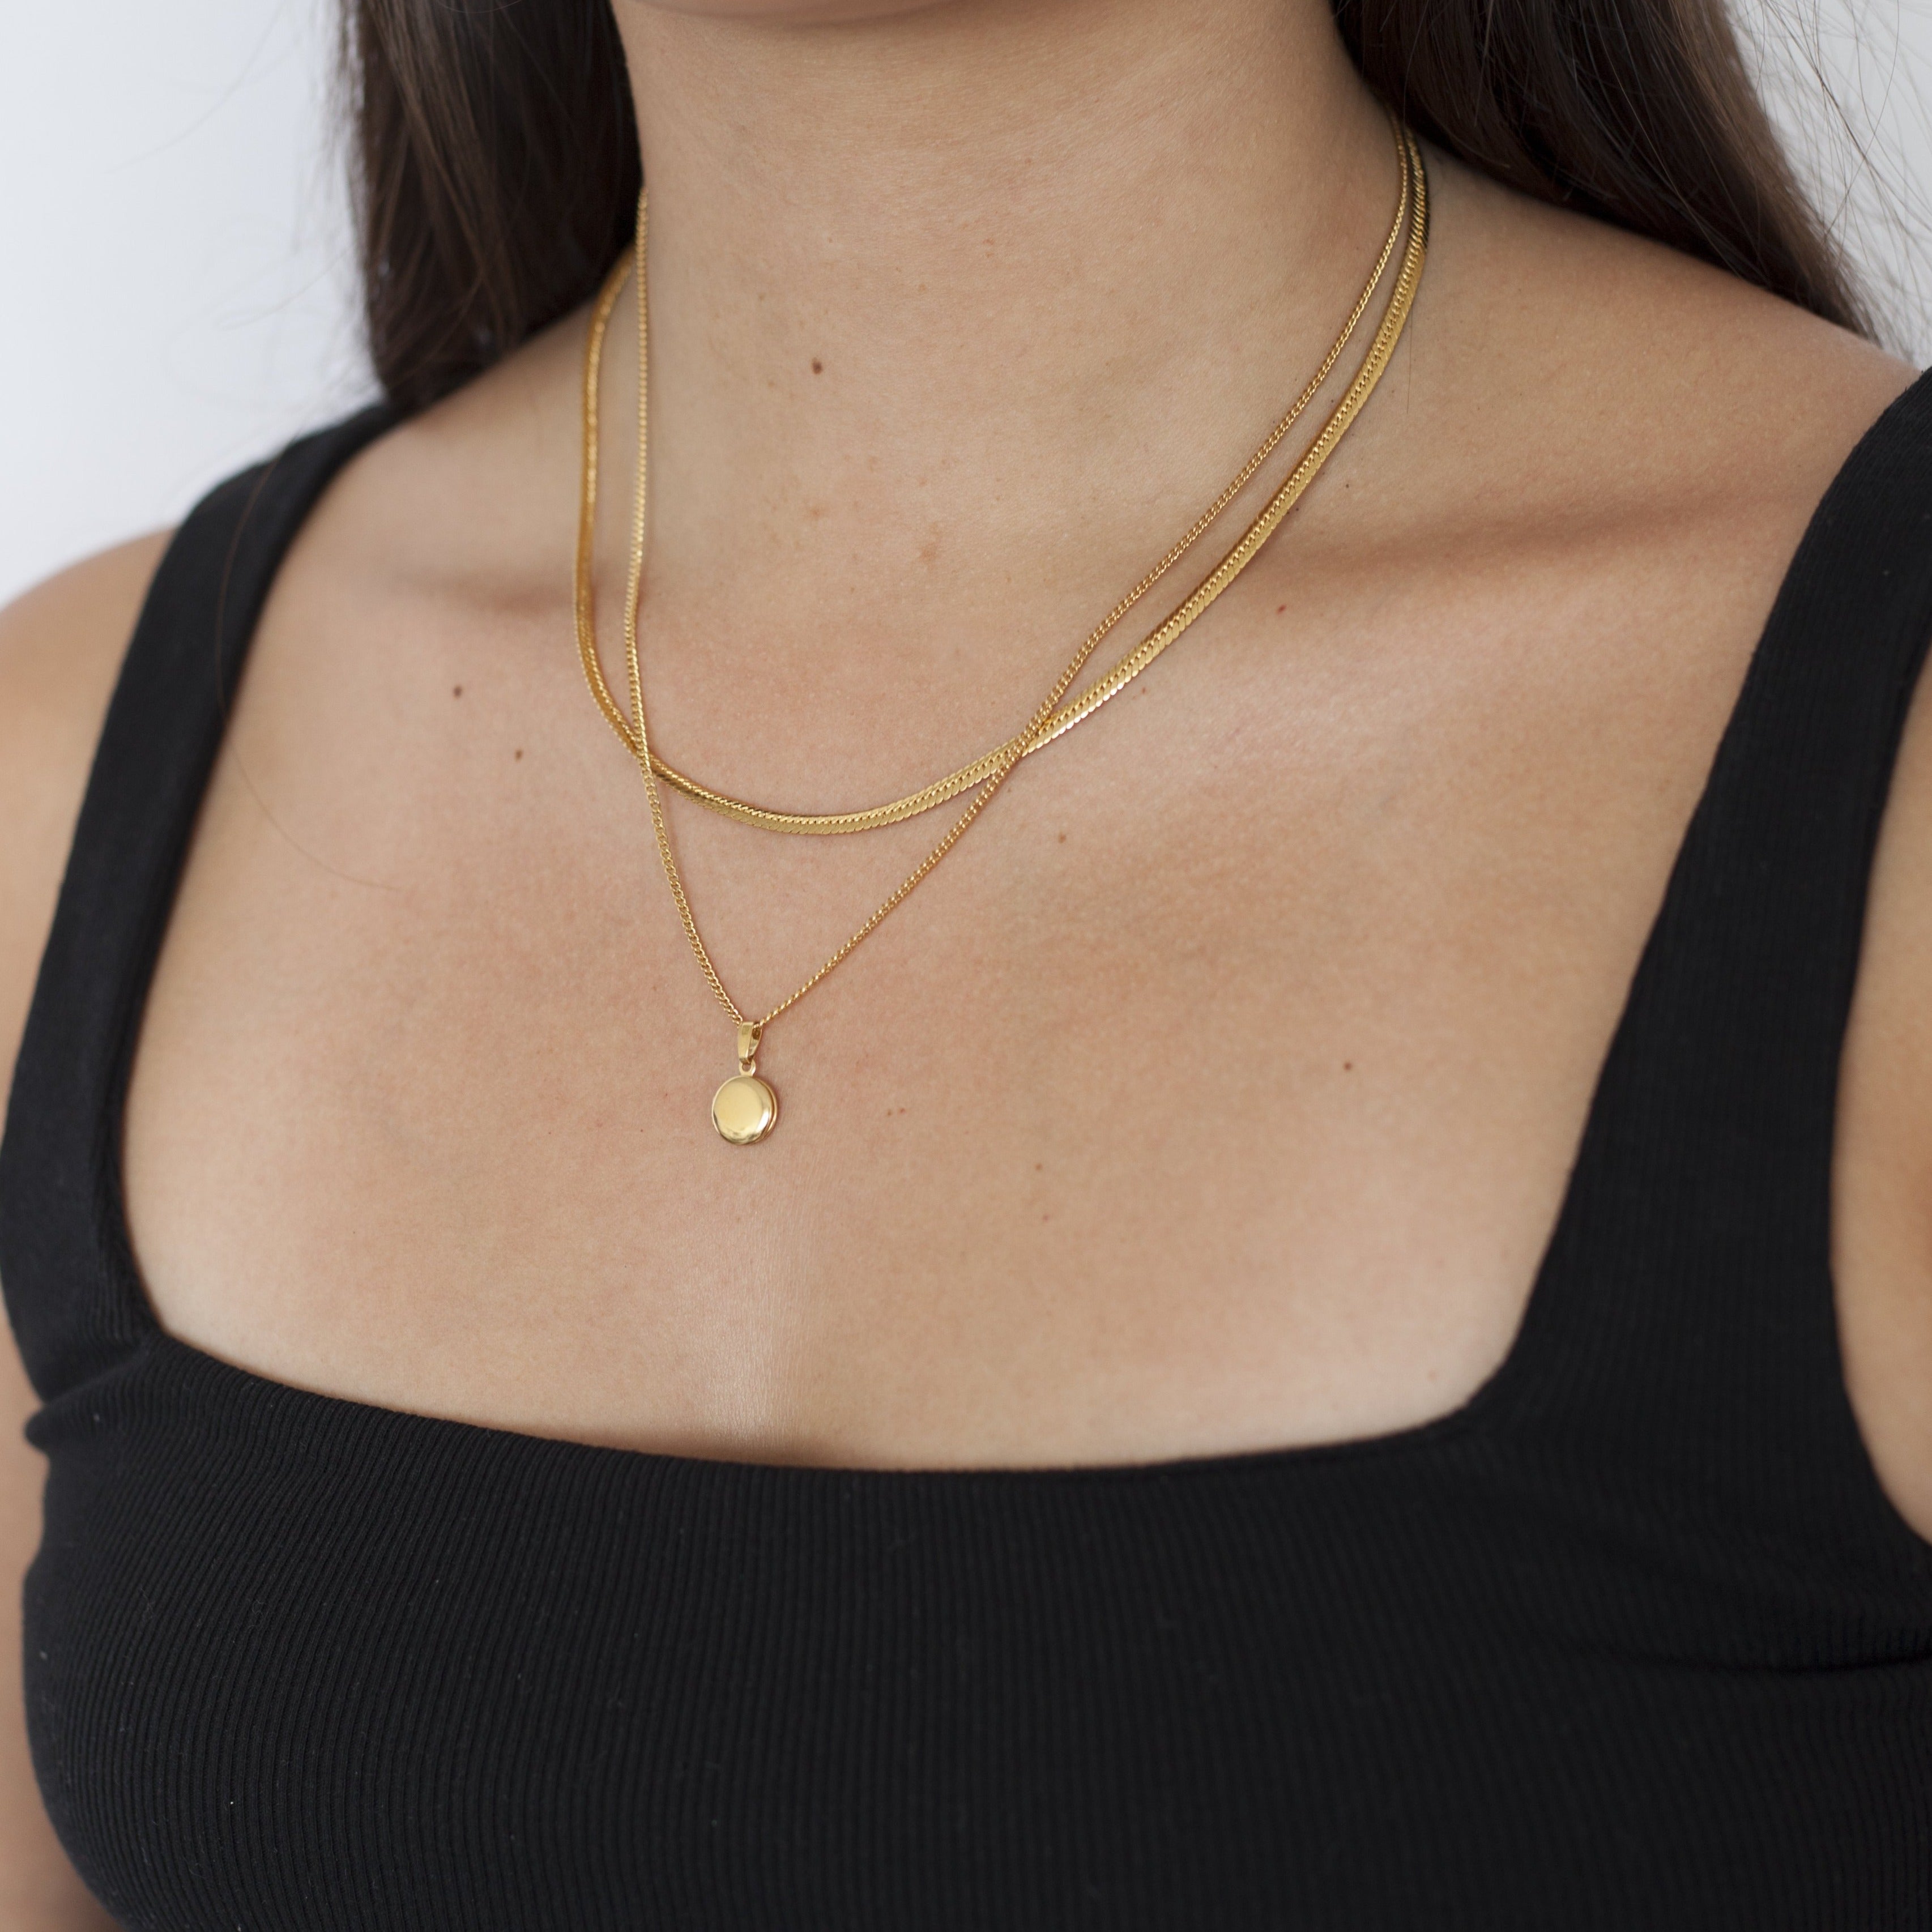 NECKLACES – Cuchara Jewelry